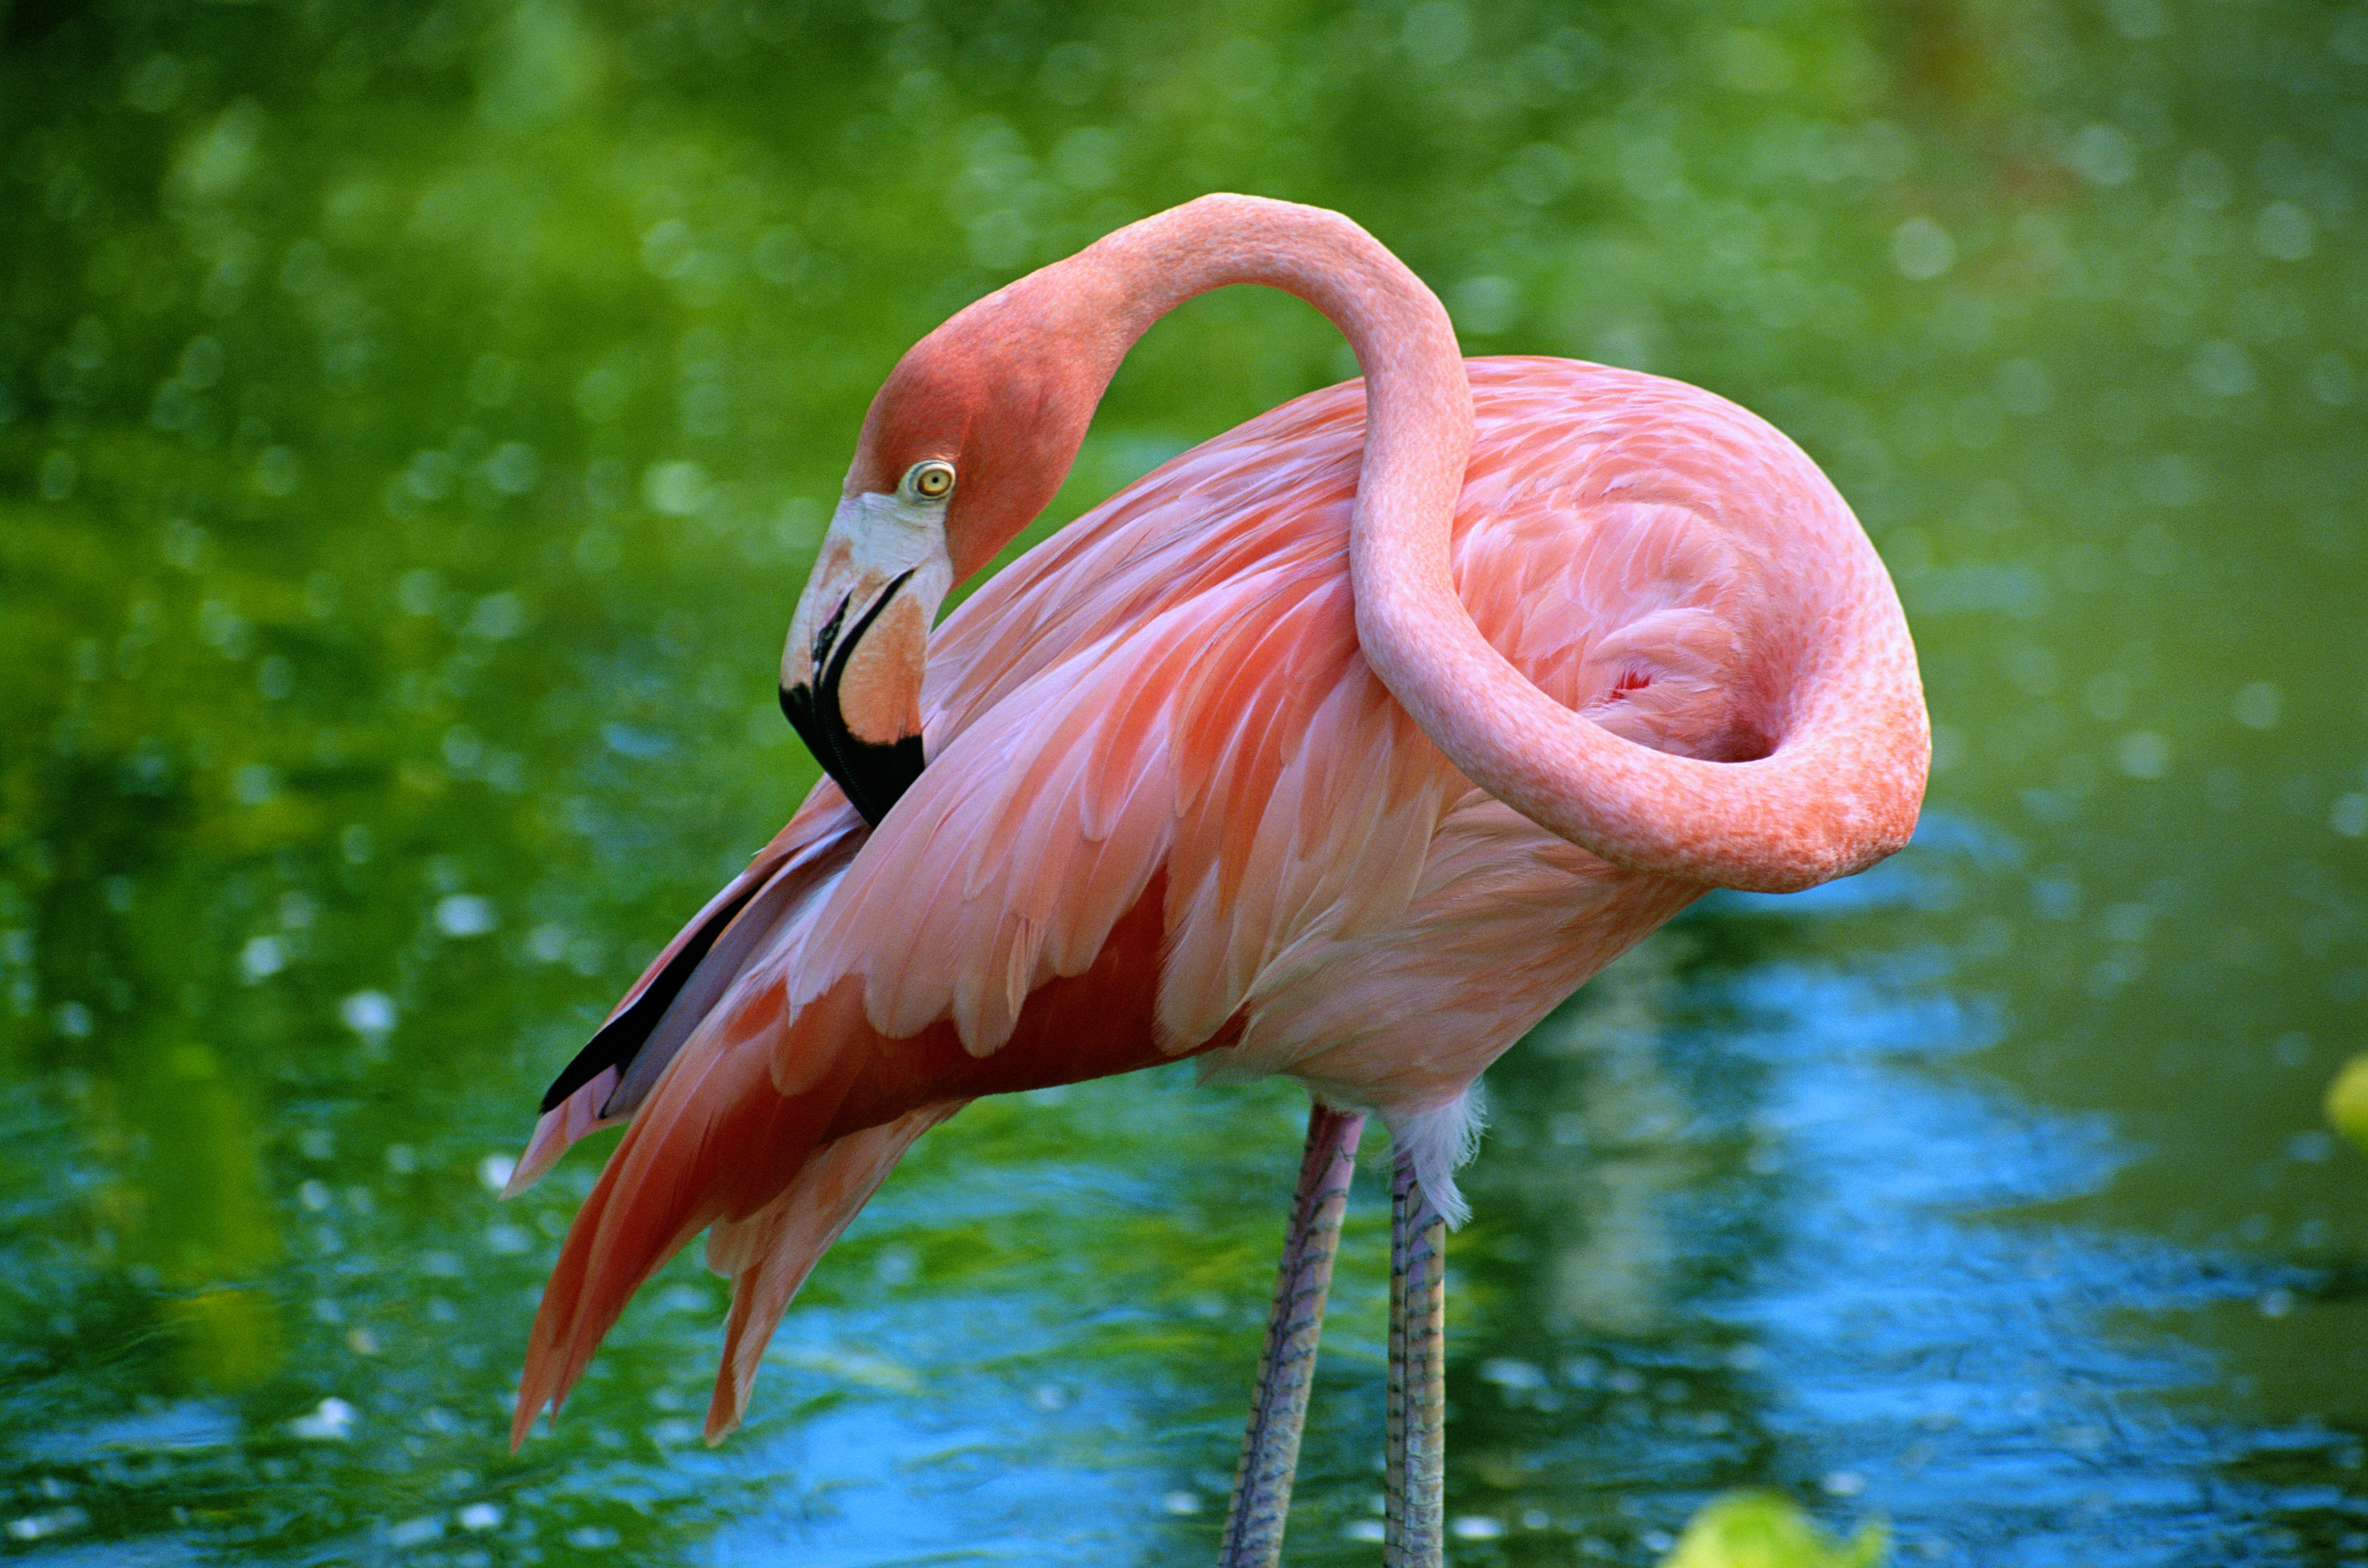 Flamingo wading in water in Cozumel, Mexico